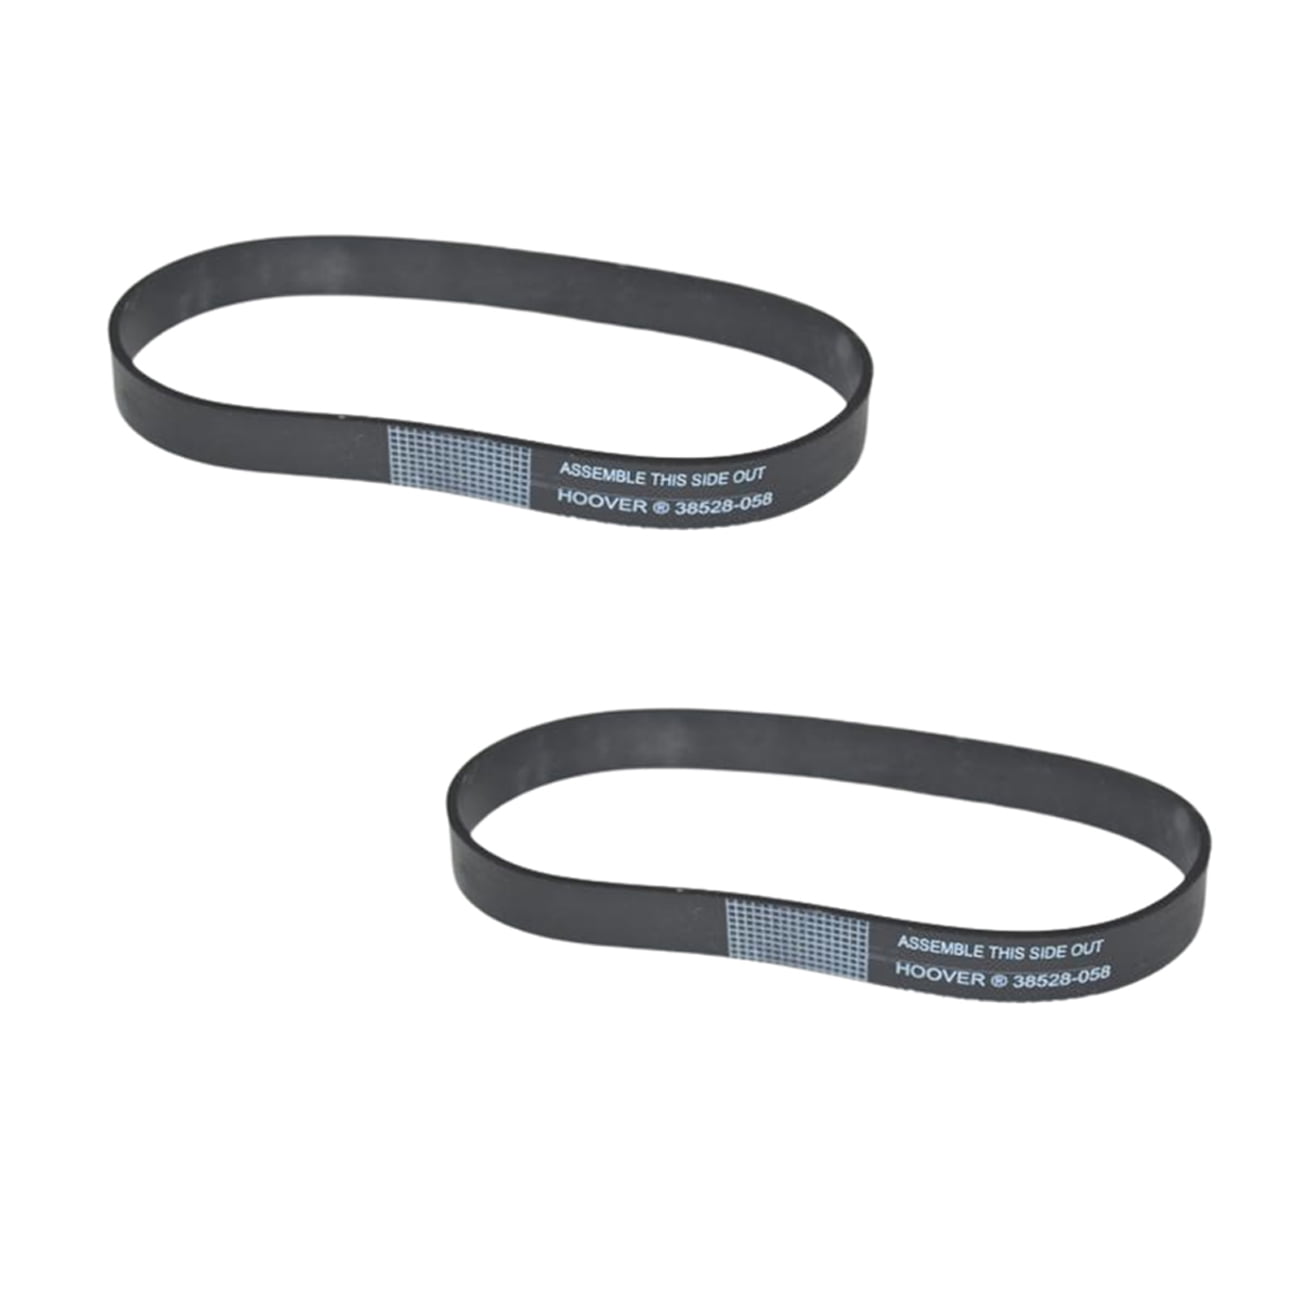 4 Hoover 38528-033 Replacement Vacuum Belts Windtunnel Fits 562932001 Ah20080 